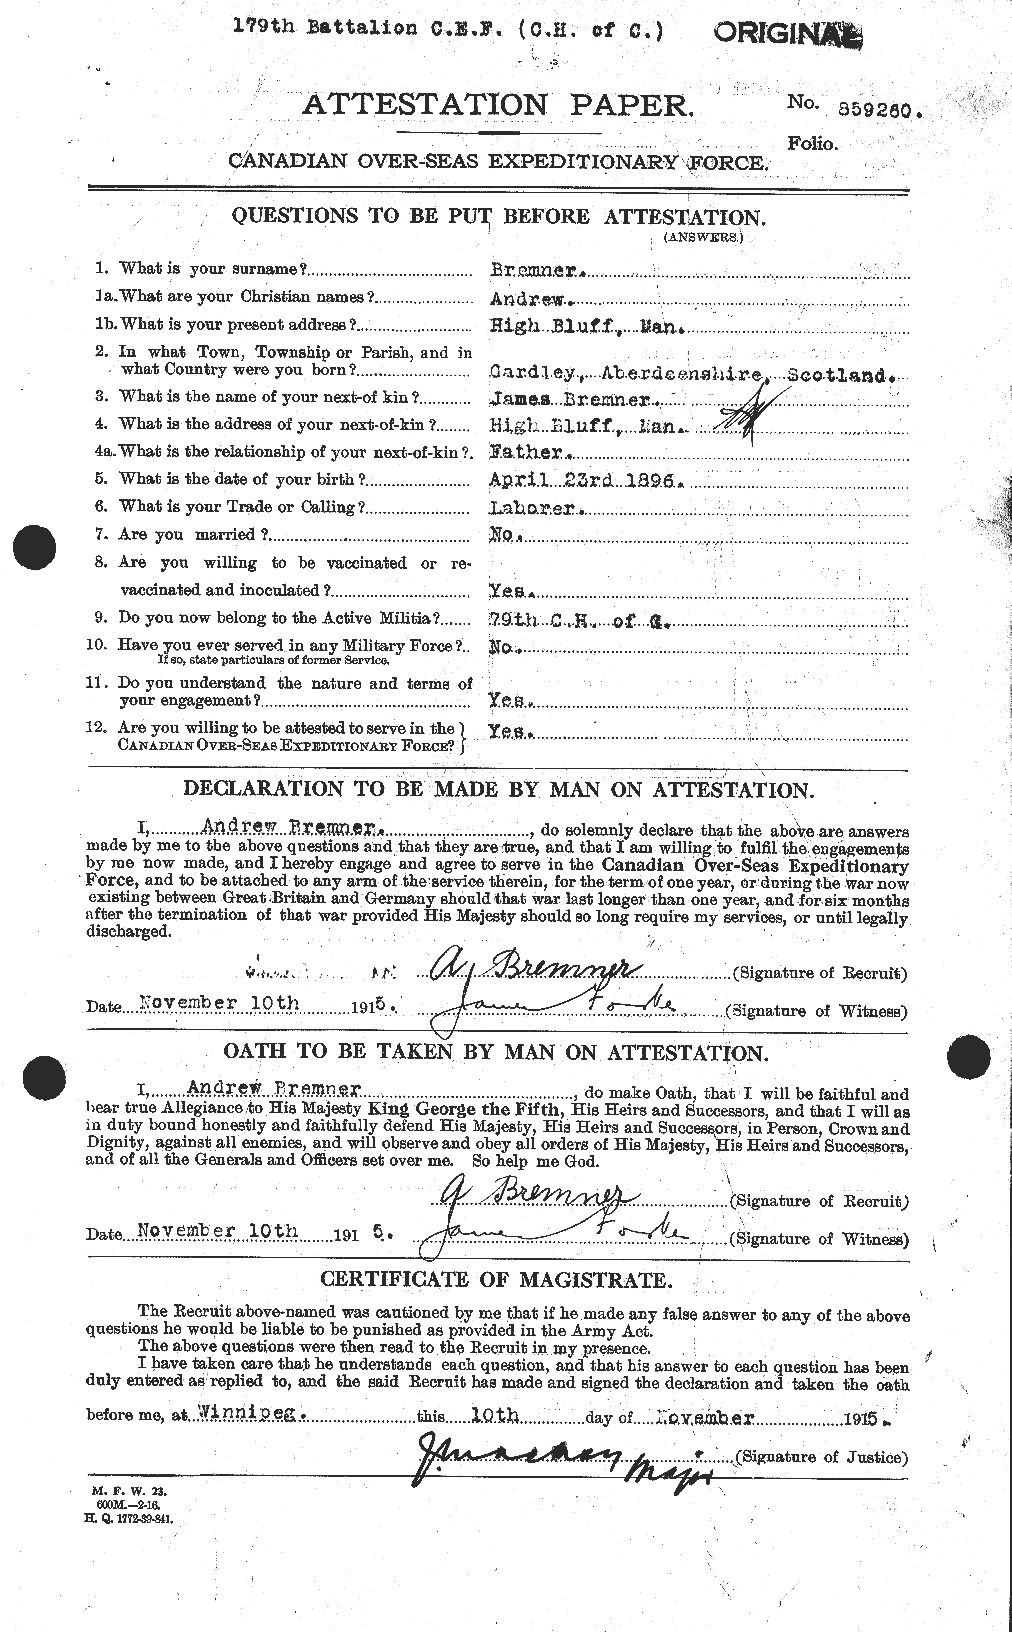 Personnel Records of the First World War - CEF 263664a